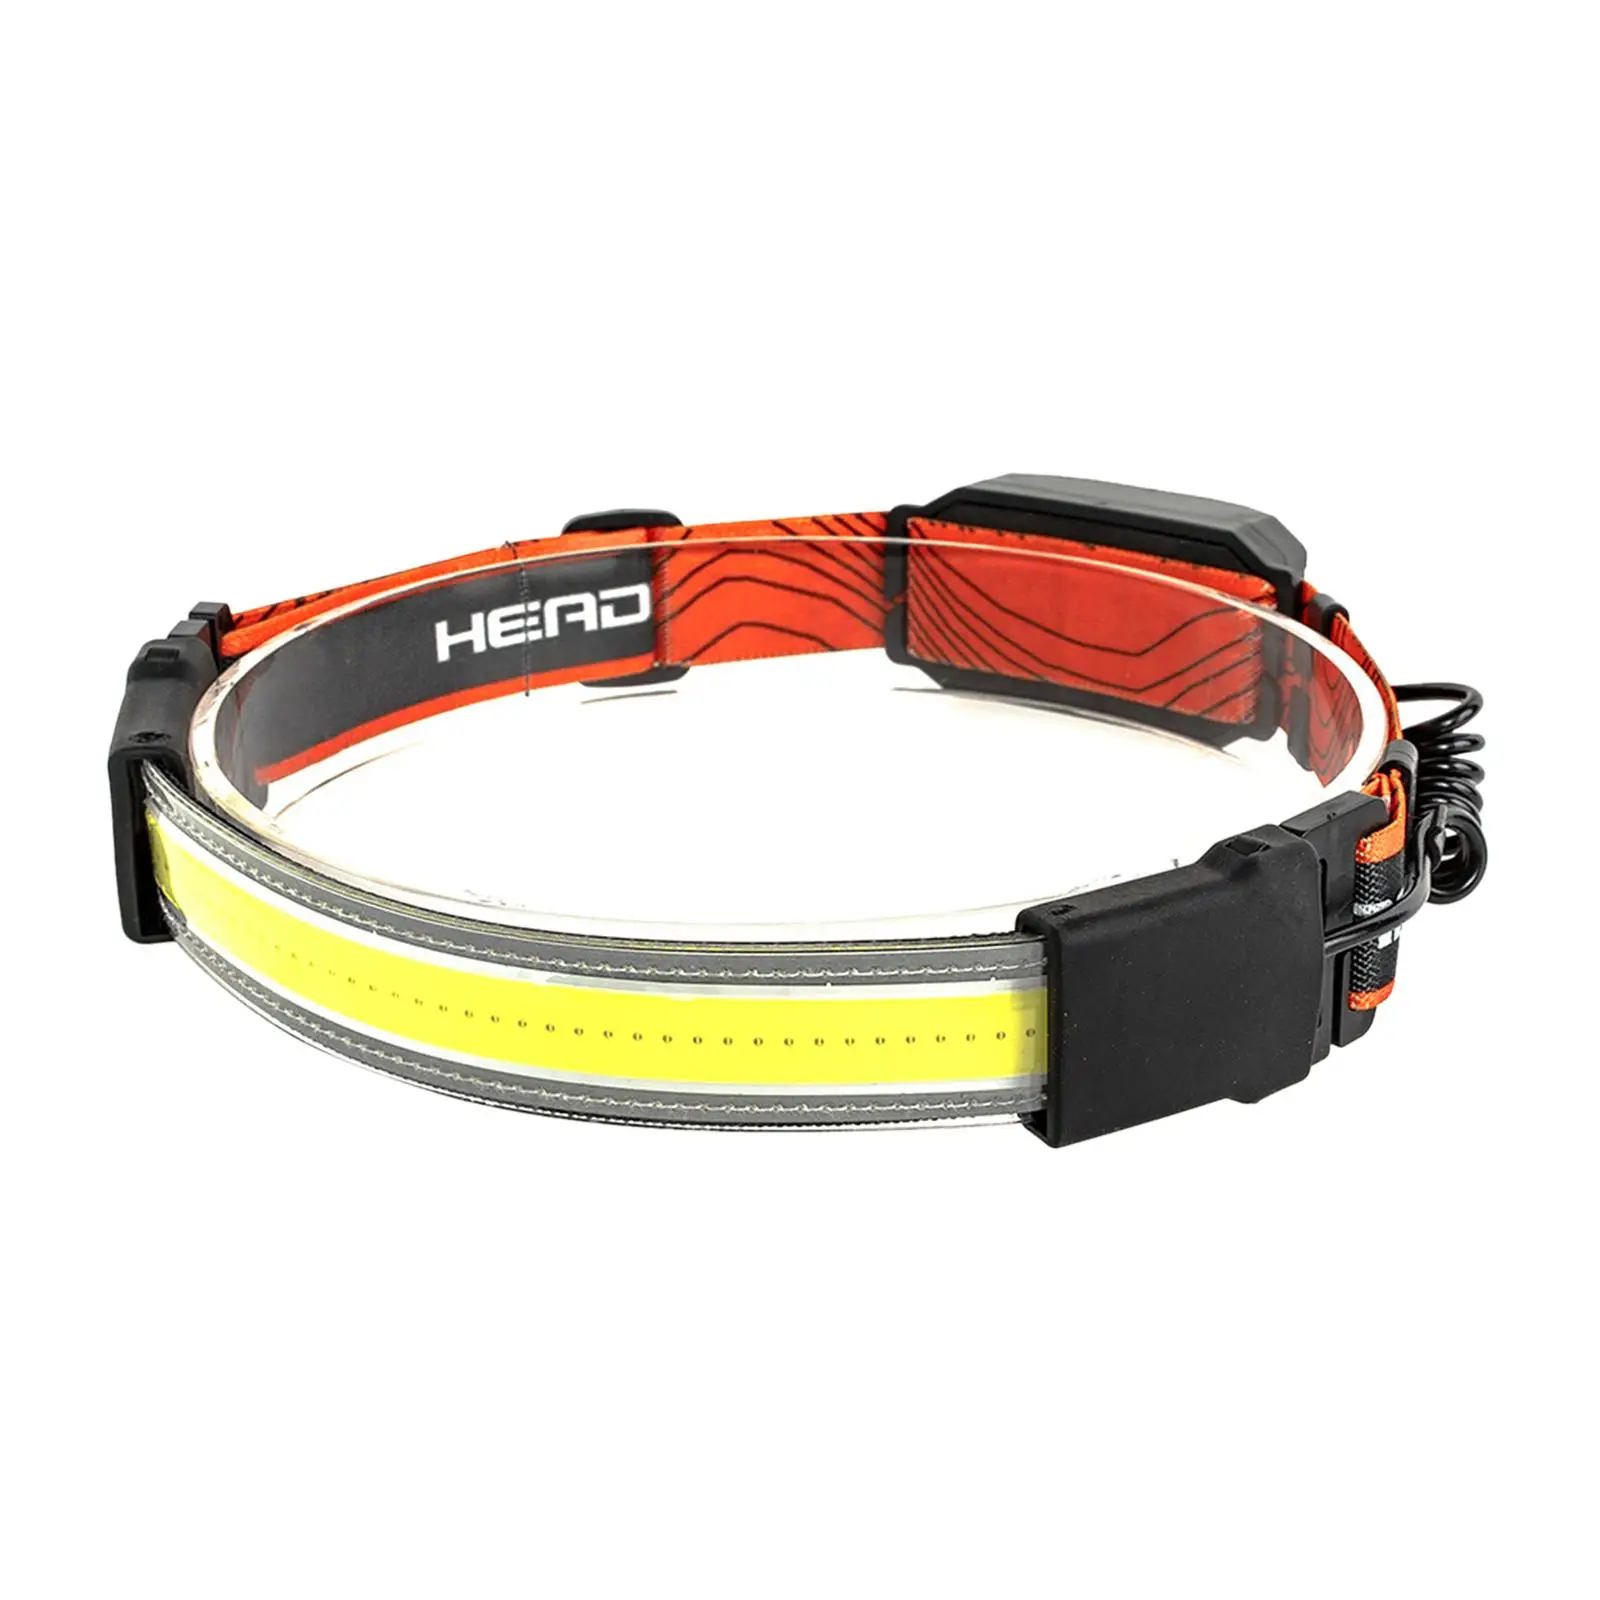  Rechargeable Waterproof LED . Great for Camping, Hunting, Runners, Hiking, Outdoors, Fishing